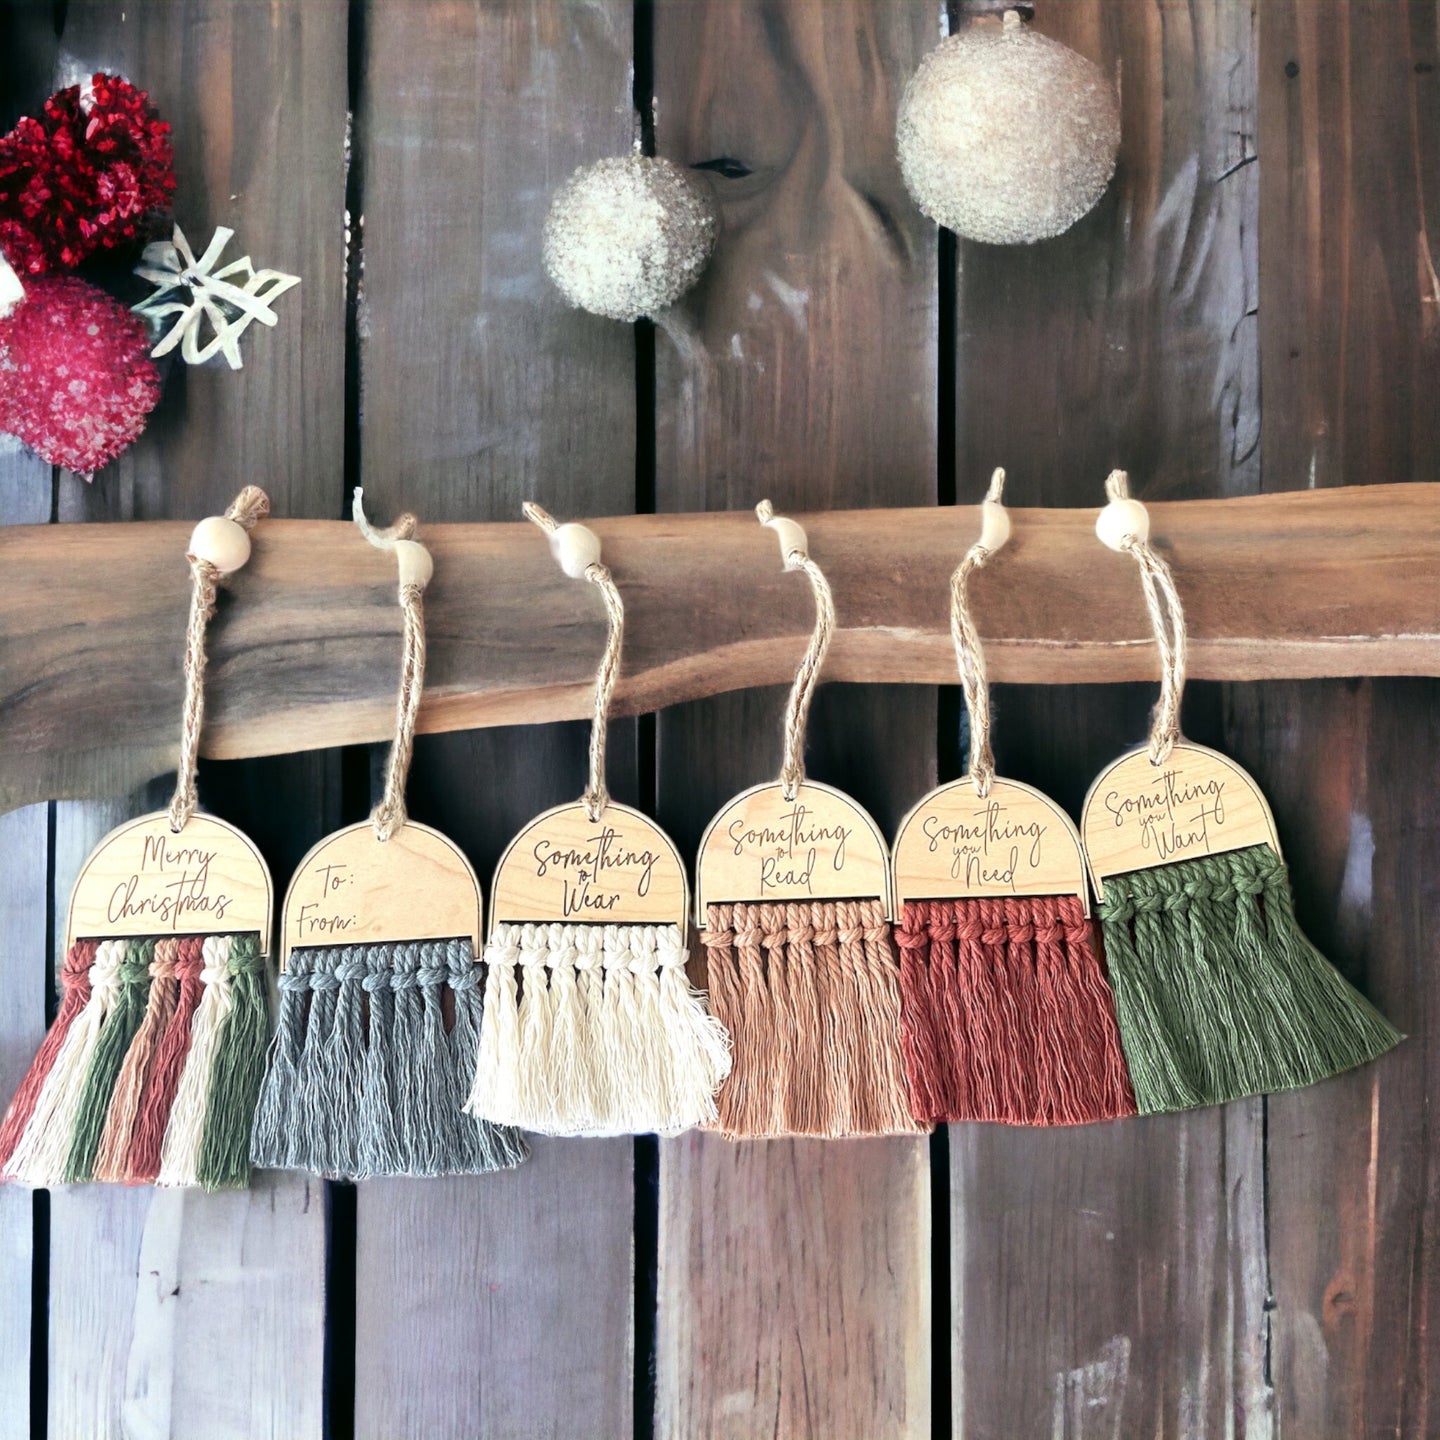 Macrame Packaging Ornaments {Something you.....}